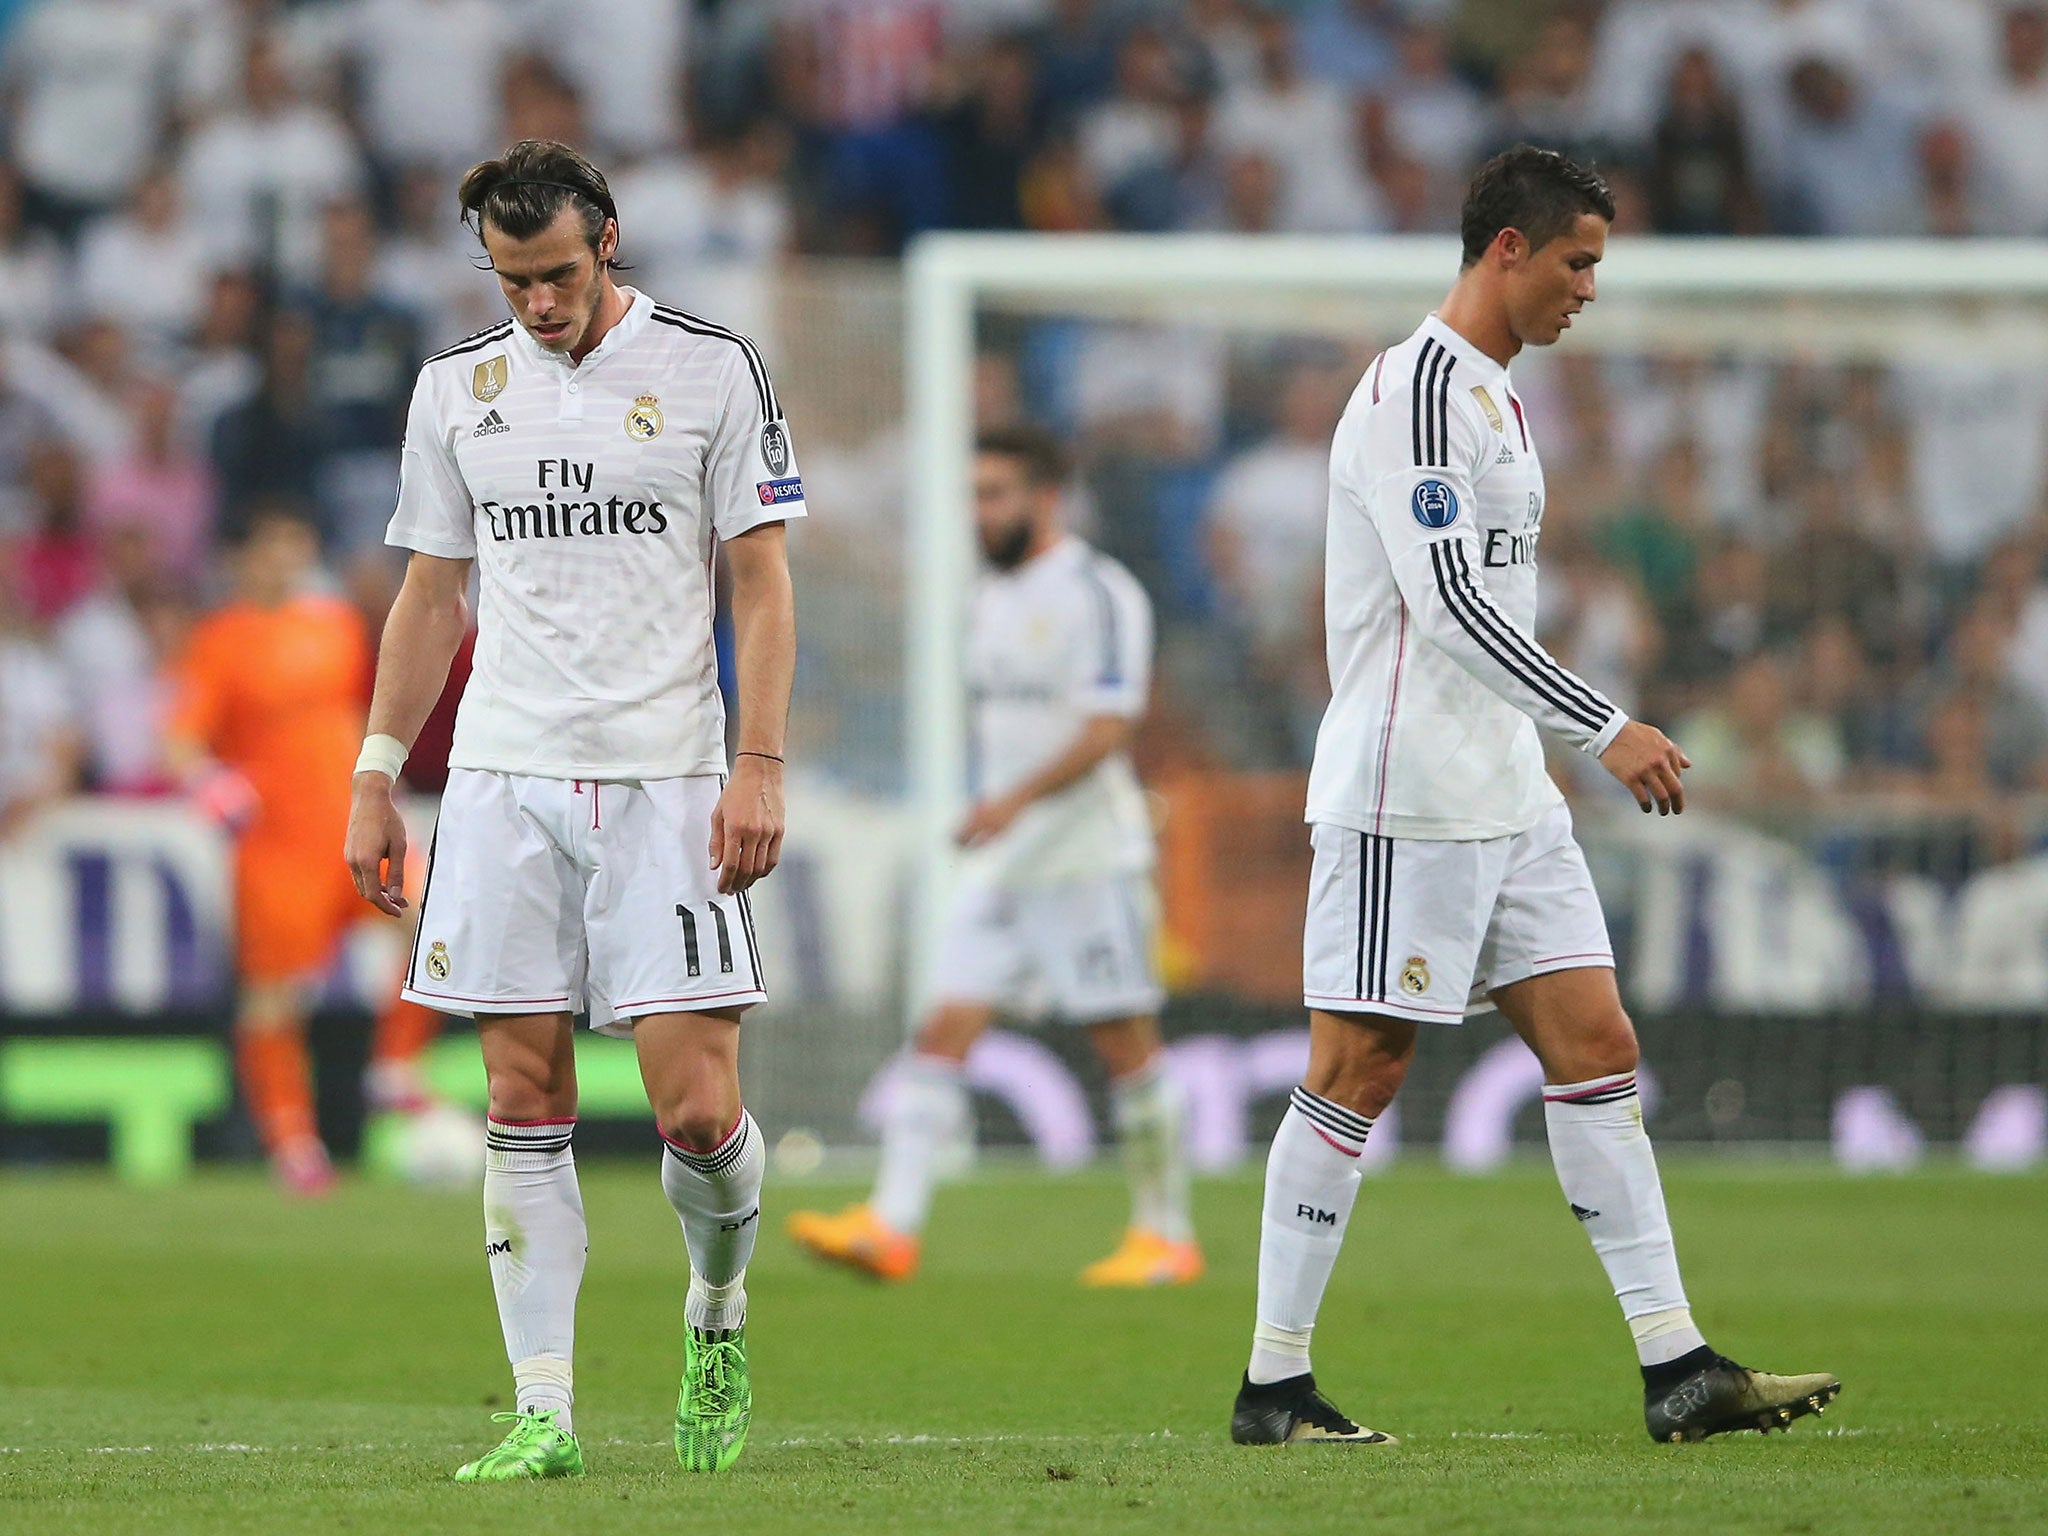 Real Madrid teammates Gareth Bale and Cristiano Ronaldo may not be talking for some time